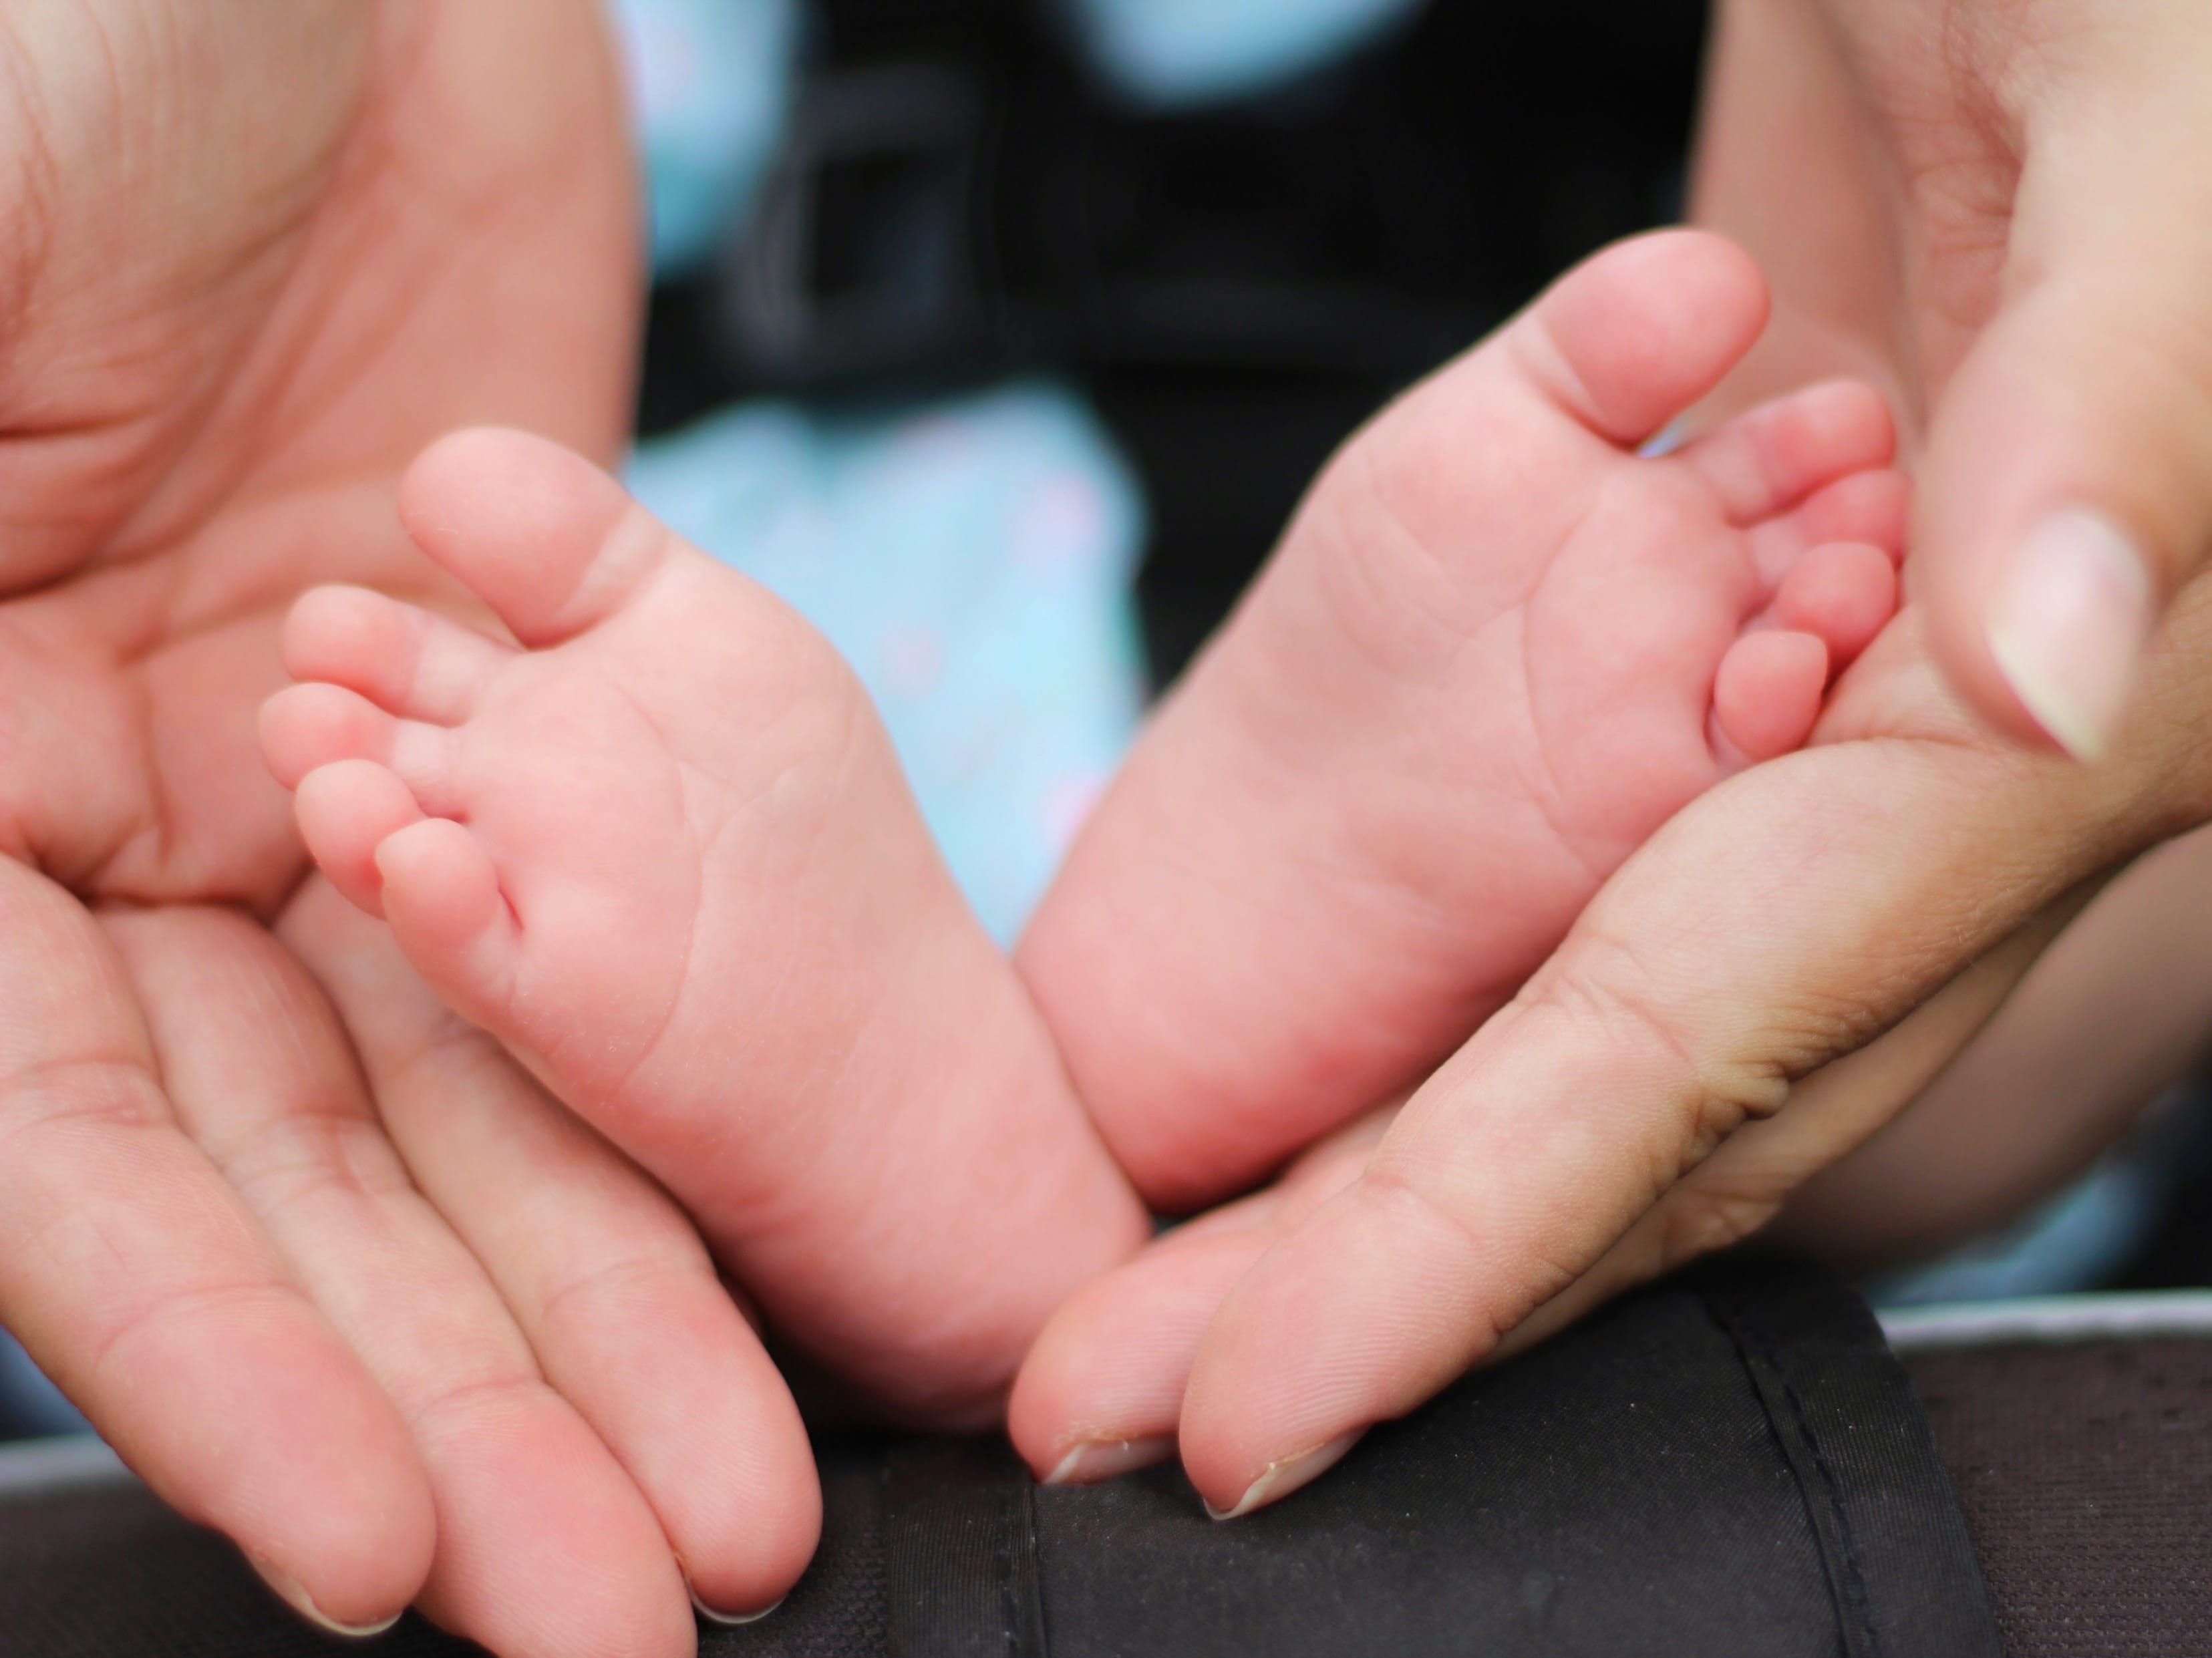 Woman holding a baby’s feet; image by Bonnie Kittle, via Unsplash.com.